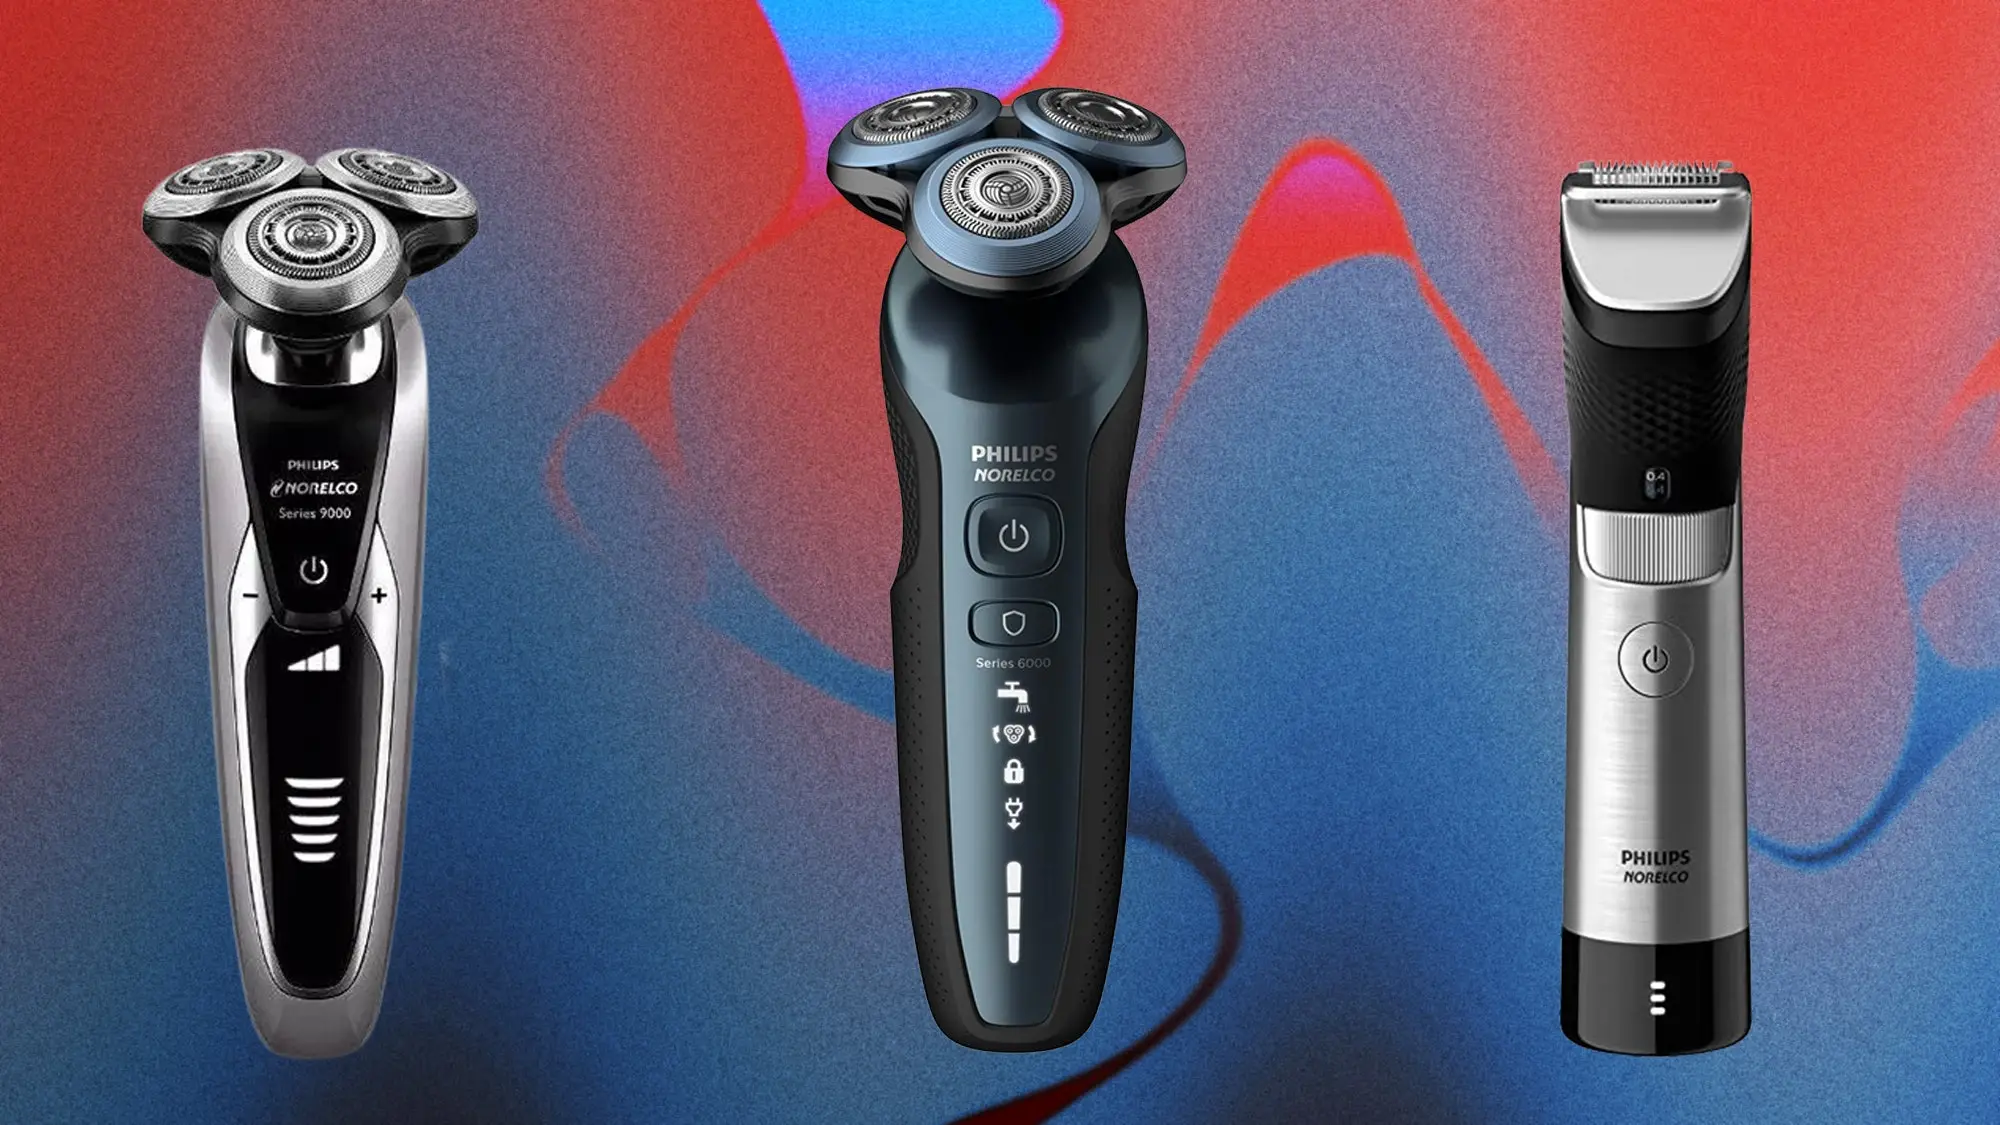 Foil Shaver Or Rotary Shaver, Which Is Better?